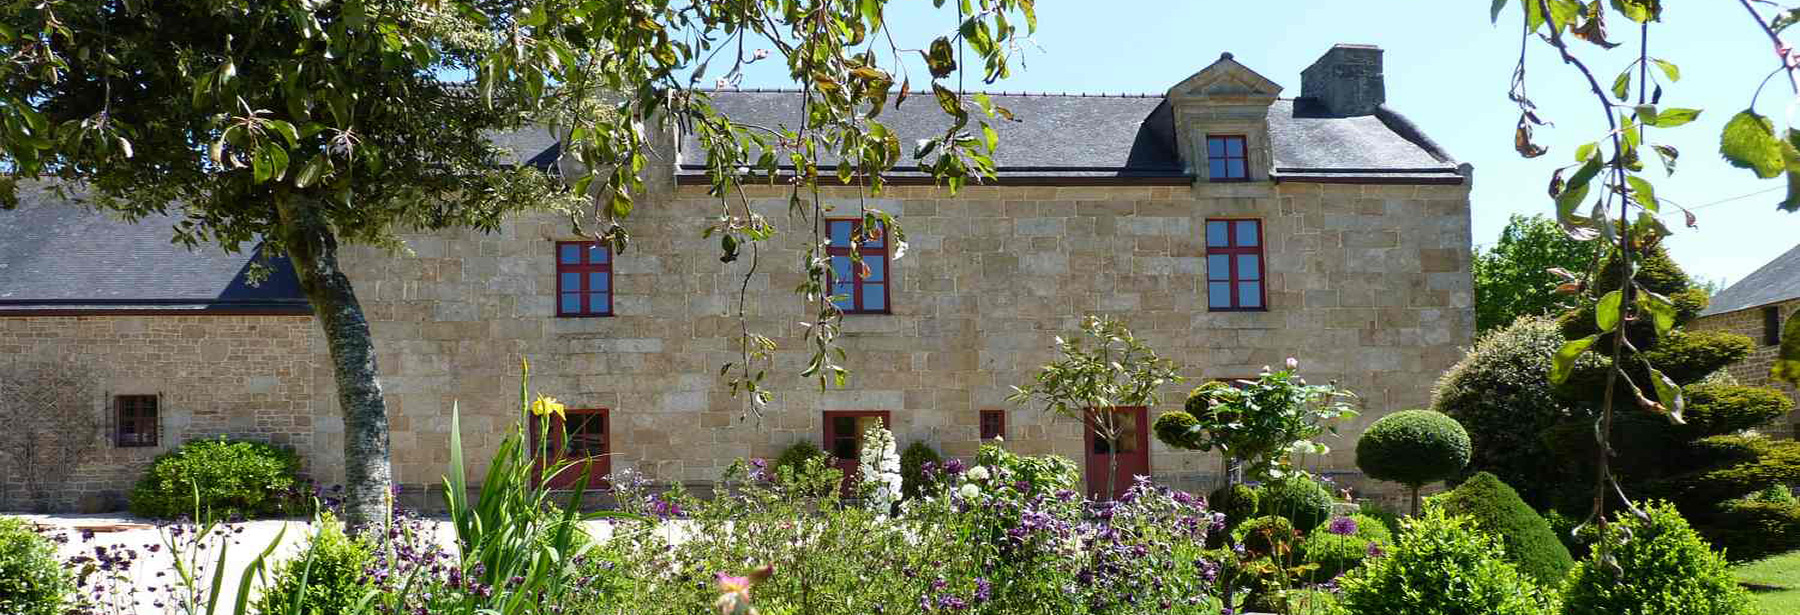 Manoir du Vaugarny selected and inspected by Sawday's